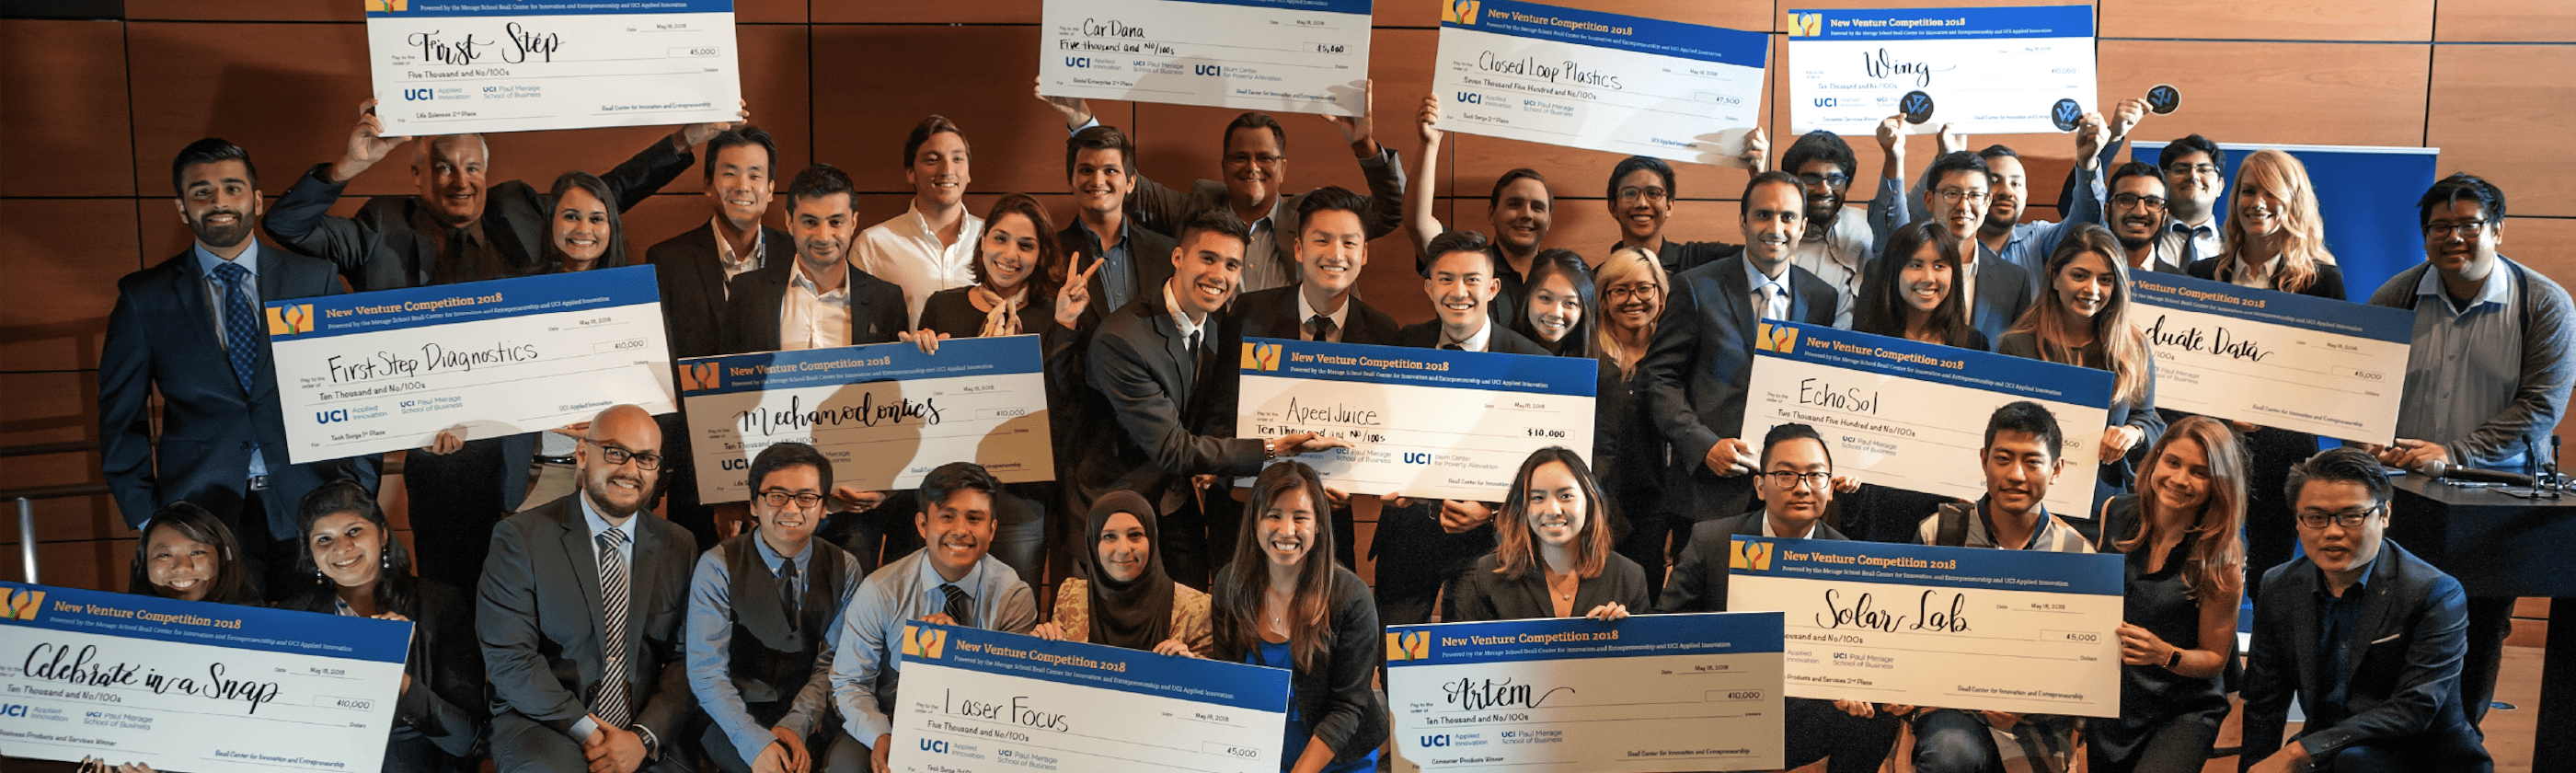 New Venture Competition Kickoff – 11/14/18